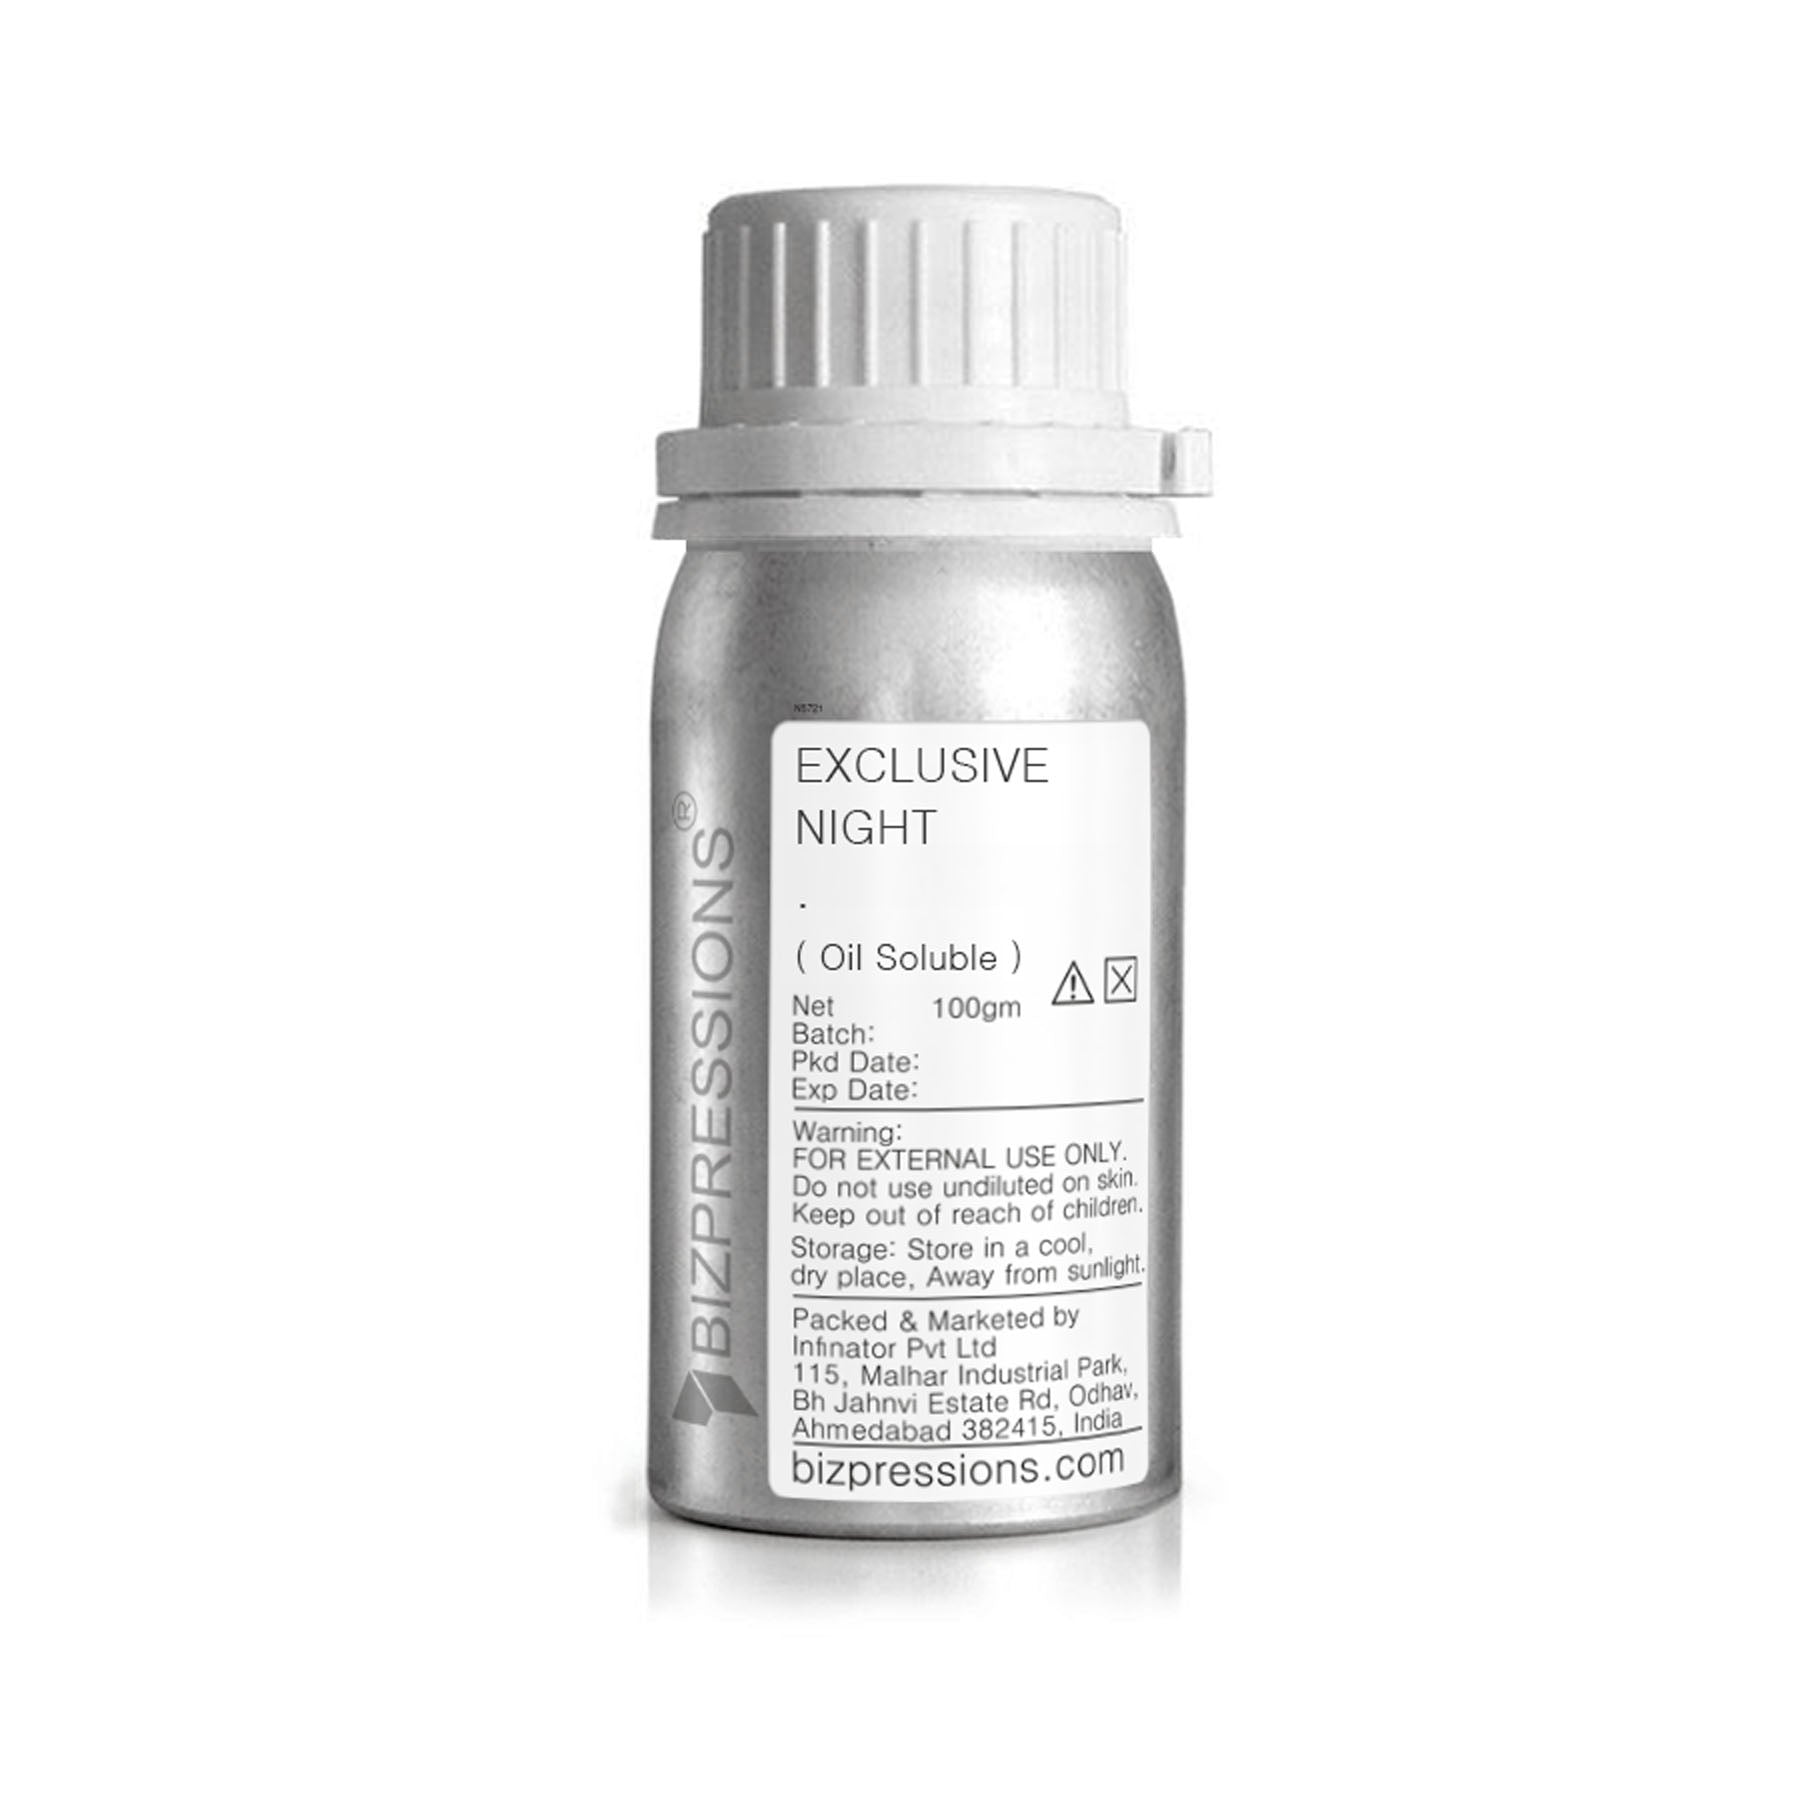 EXCLUSIVE NIGHT - Fragrance ( Oil Soluble ) - 100 gm